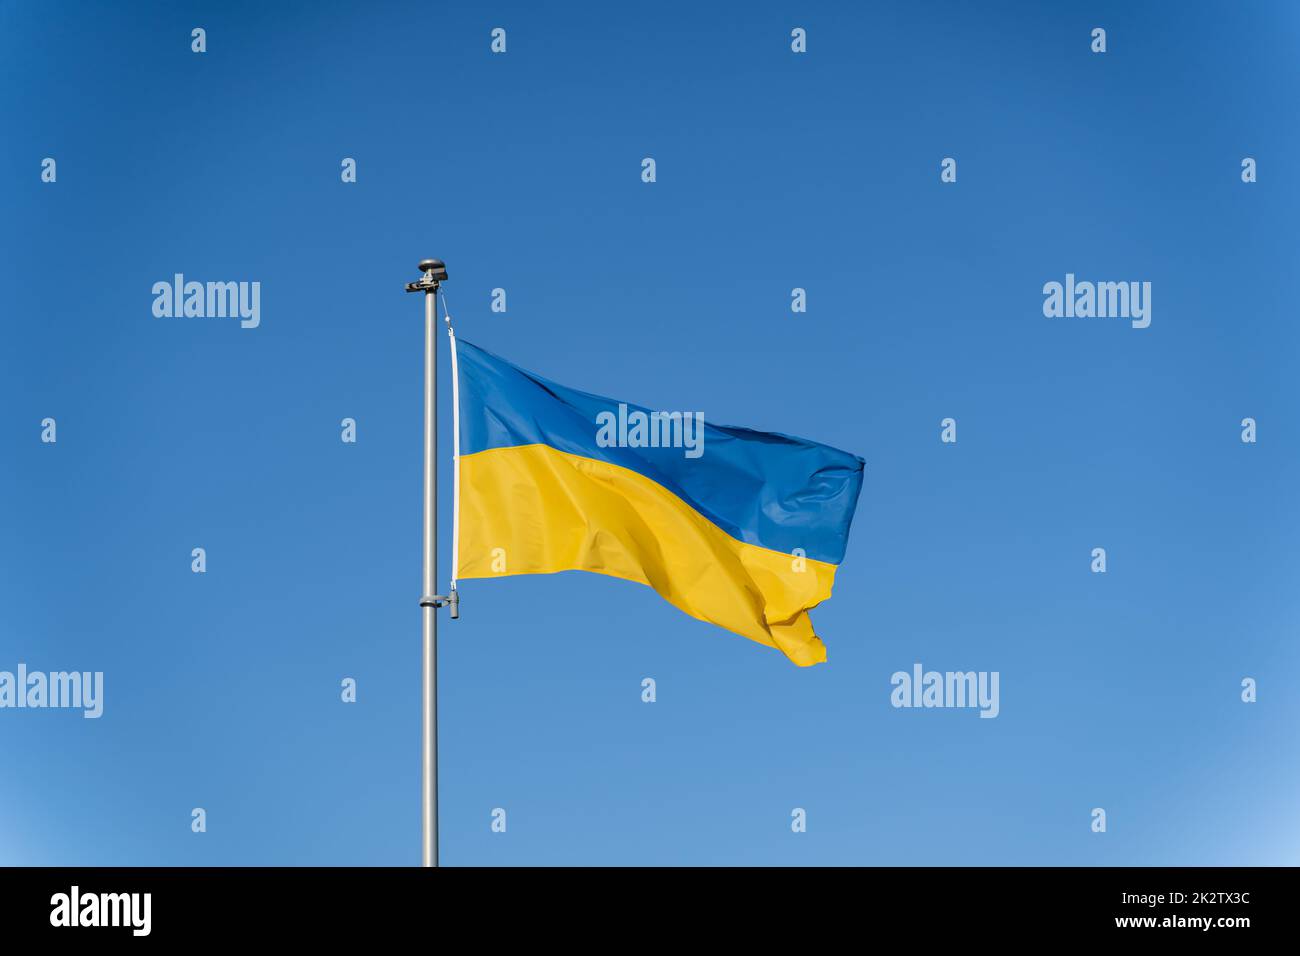 Ukrainian flag of yellow-blue colors on the background of clear blue sky Stock Photo